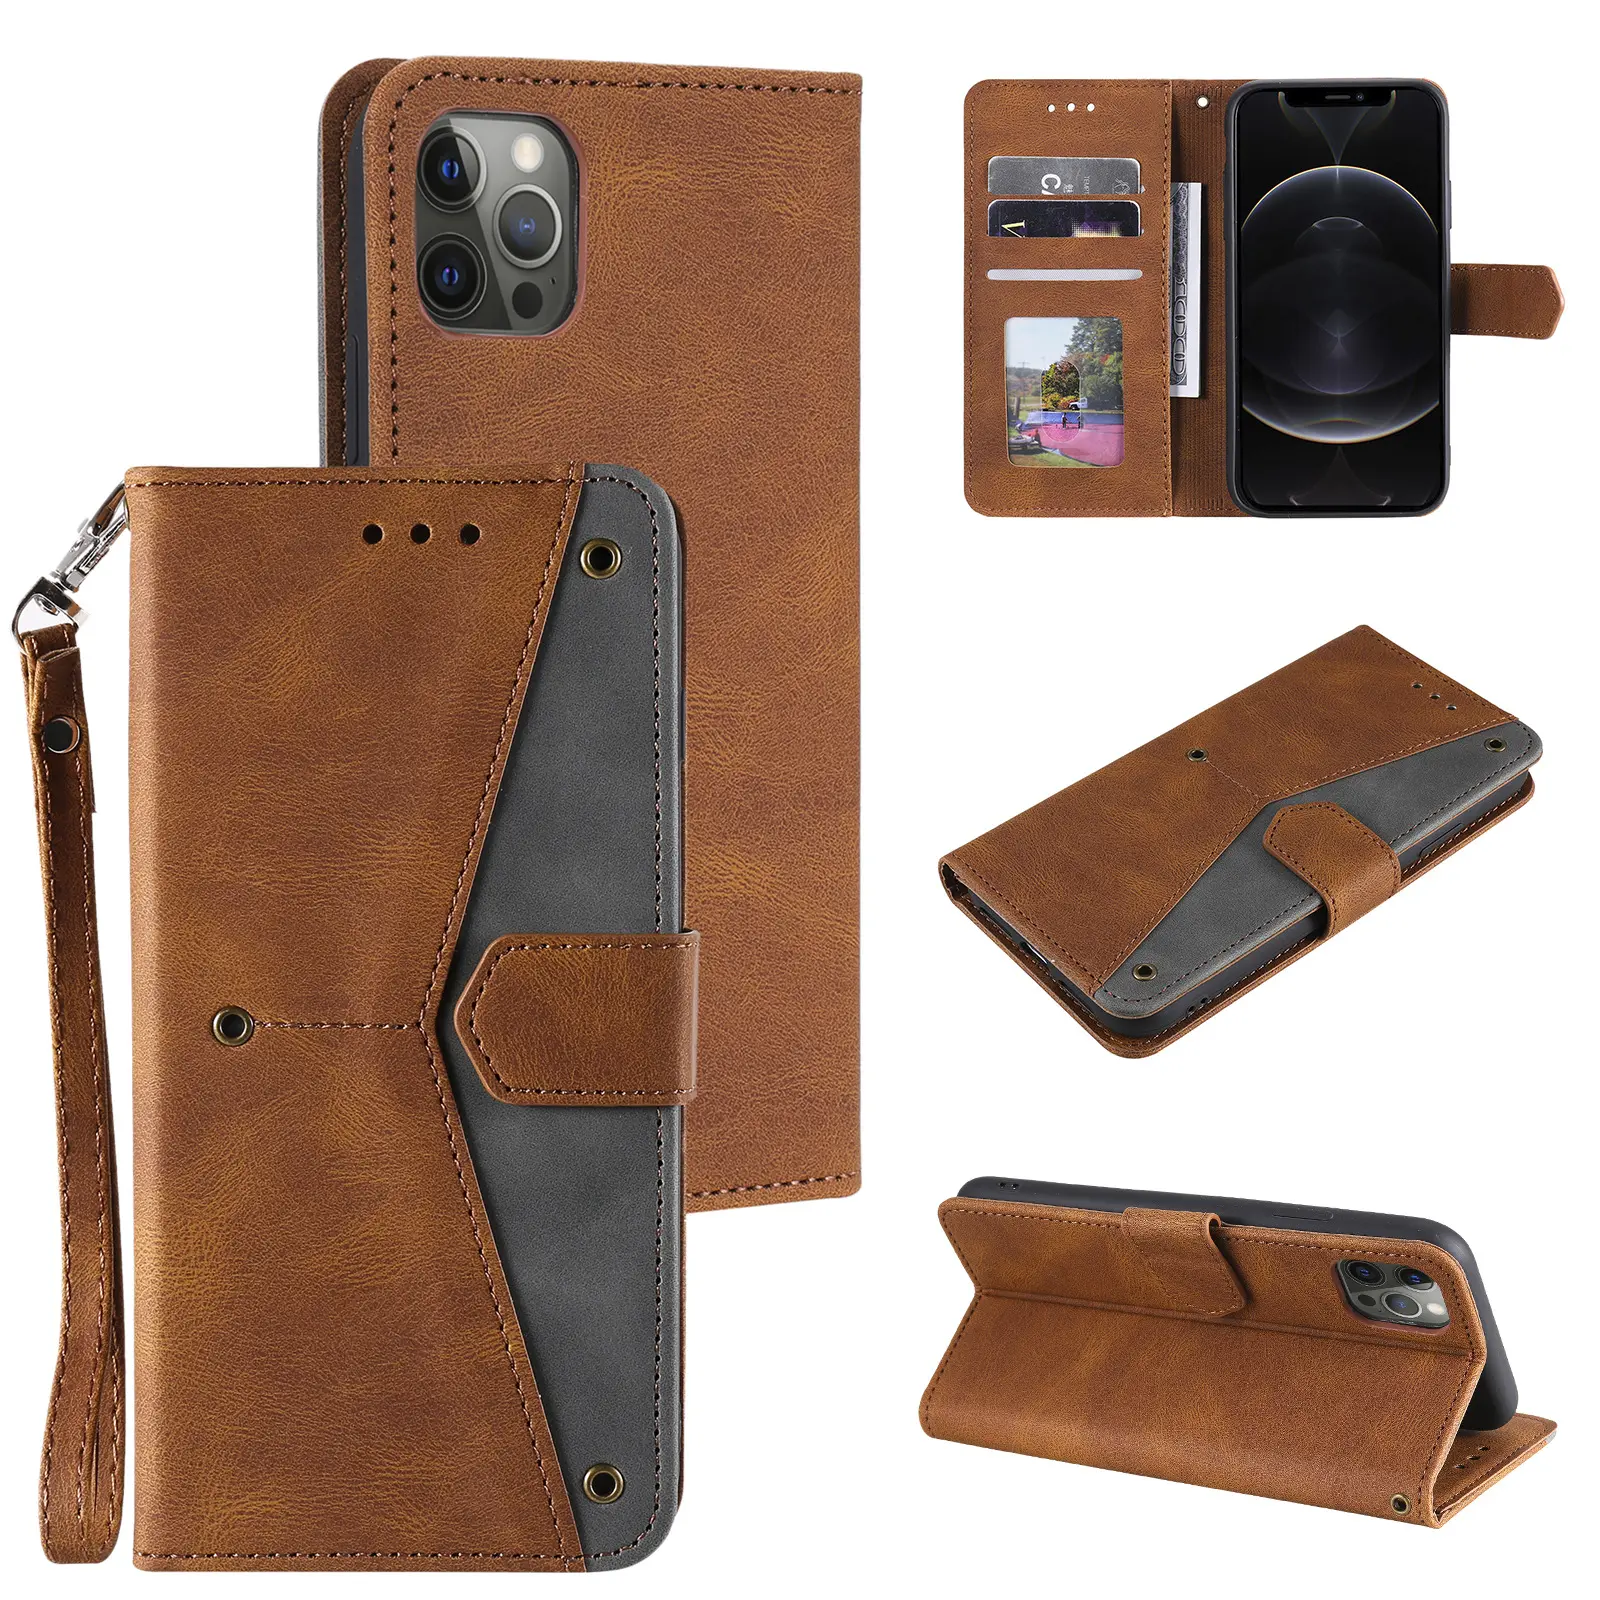 Premium Real Luxury Leather Case Cards Book Protect Cover For iPhone 14 14 Pro 13 Pro Max Stand Flip Wallet Cell Phone Case